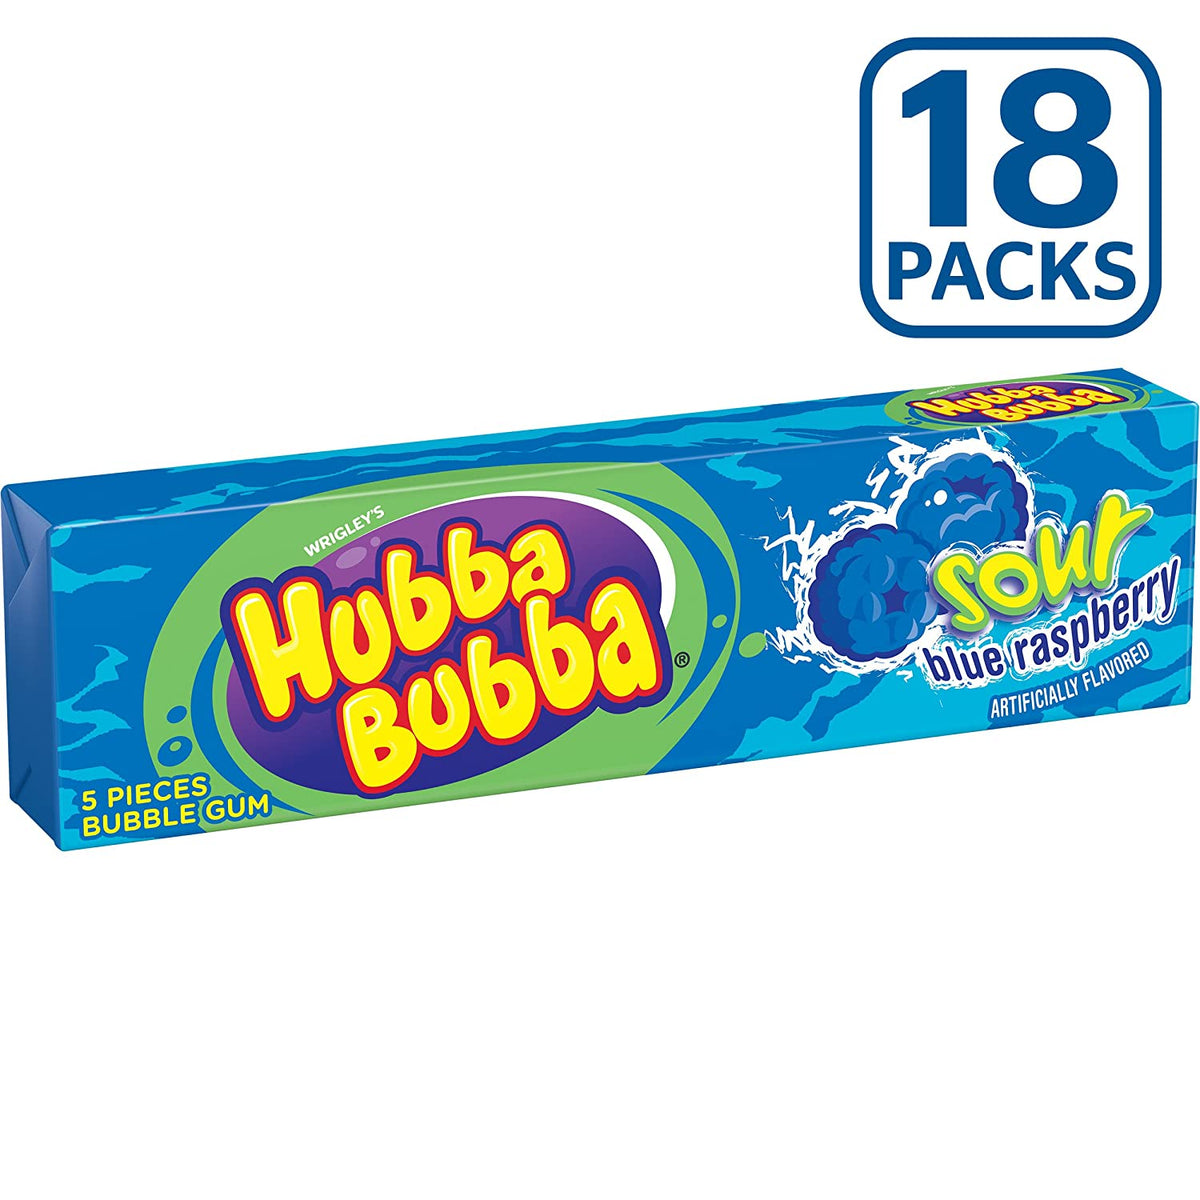 Hubba Bubba Bubble Tape Gum By Wrigley's Sour Blue Raspberry